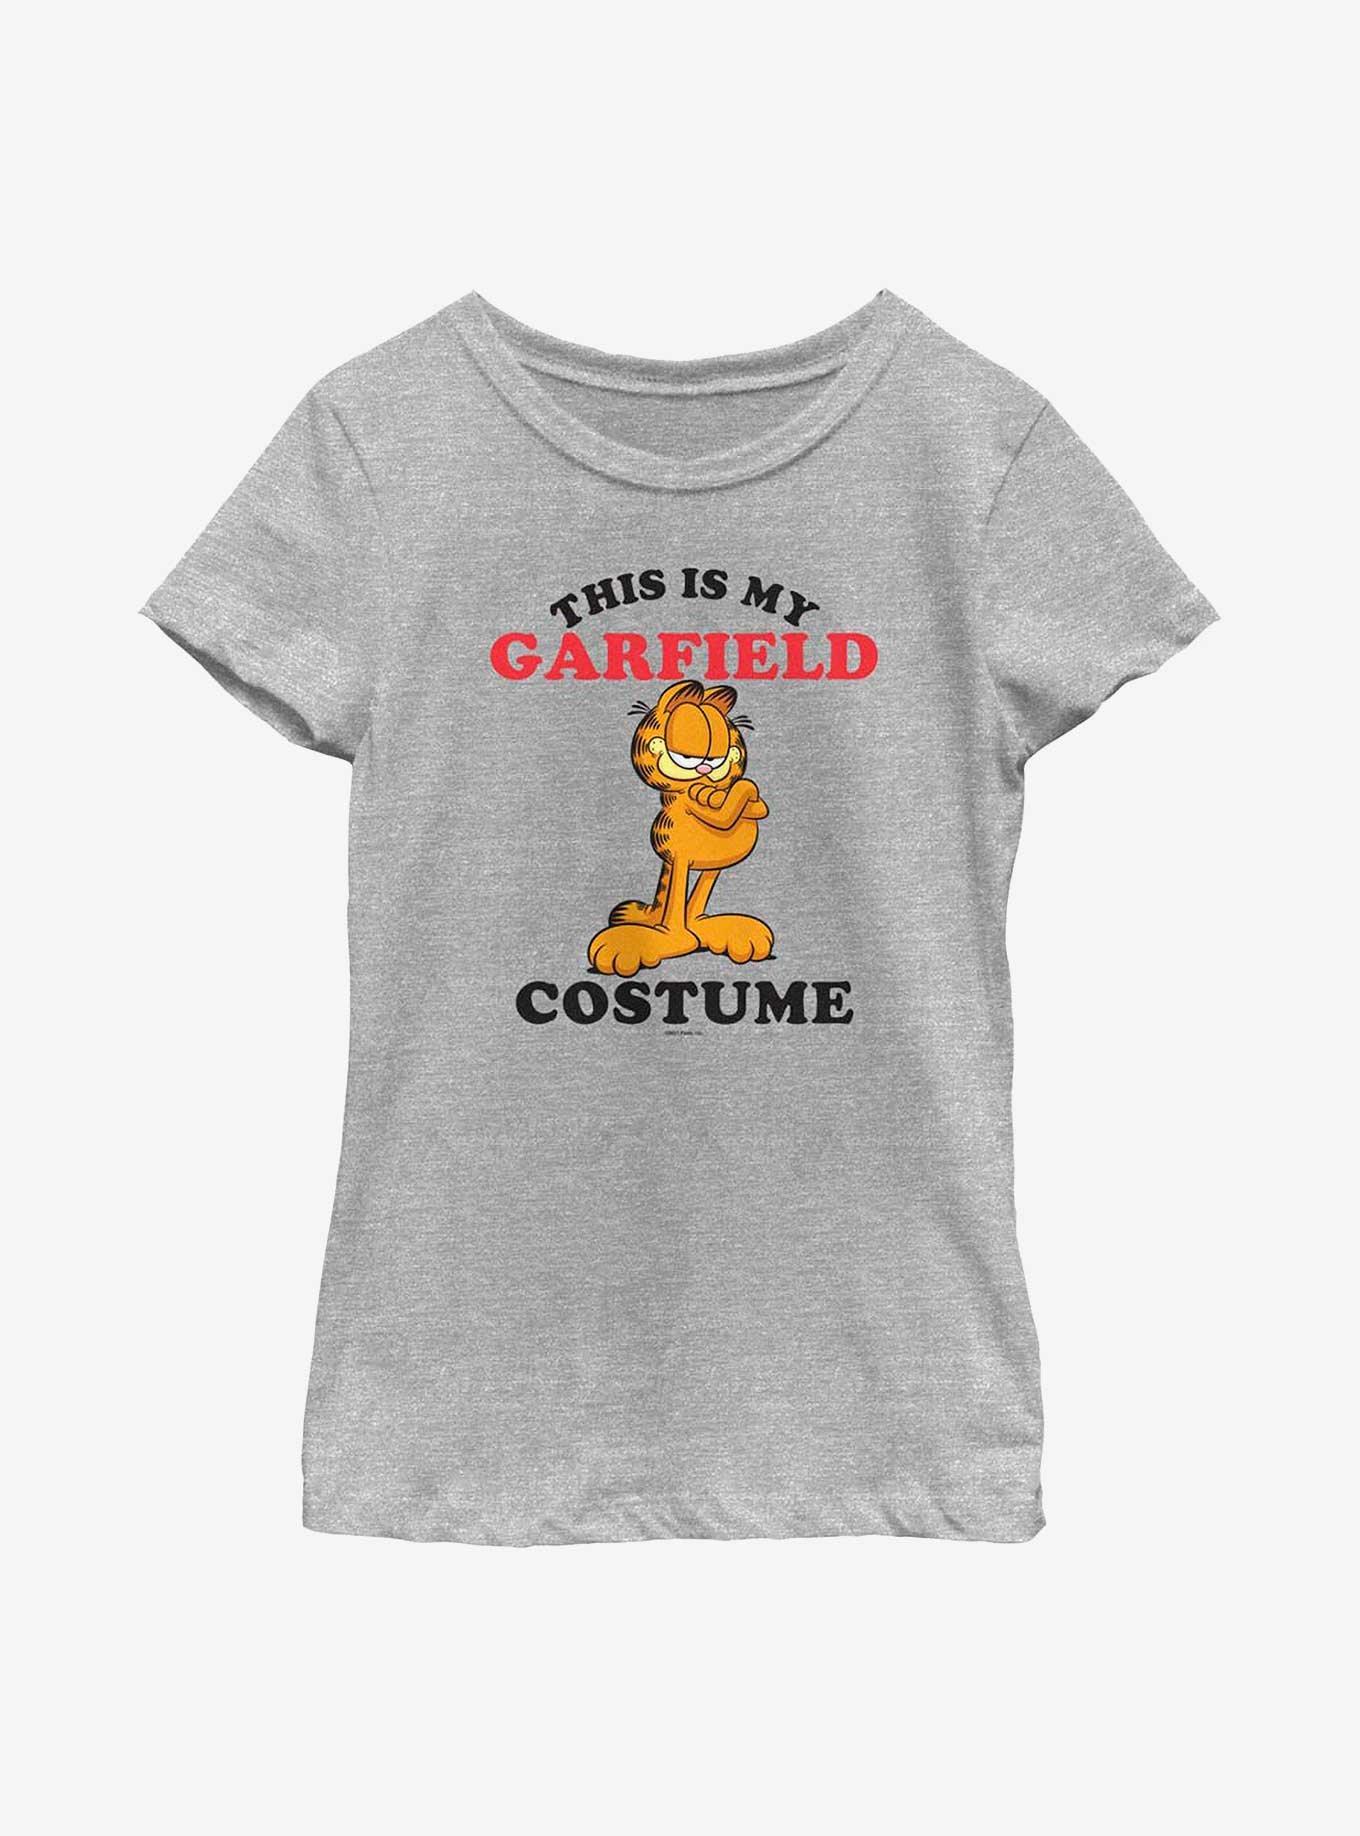 Garfield Garfield Costume Youth Girl's T-Shirt, ATH HTR, hi-res